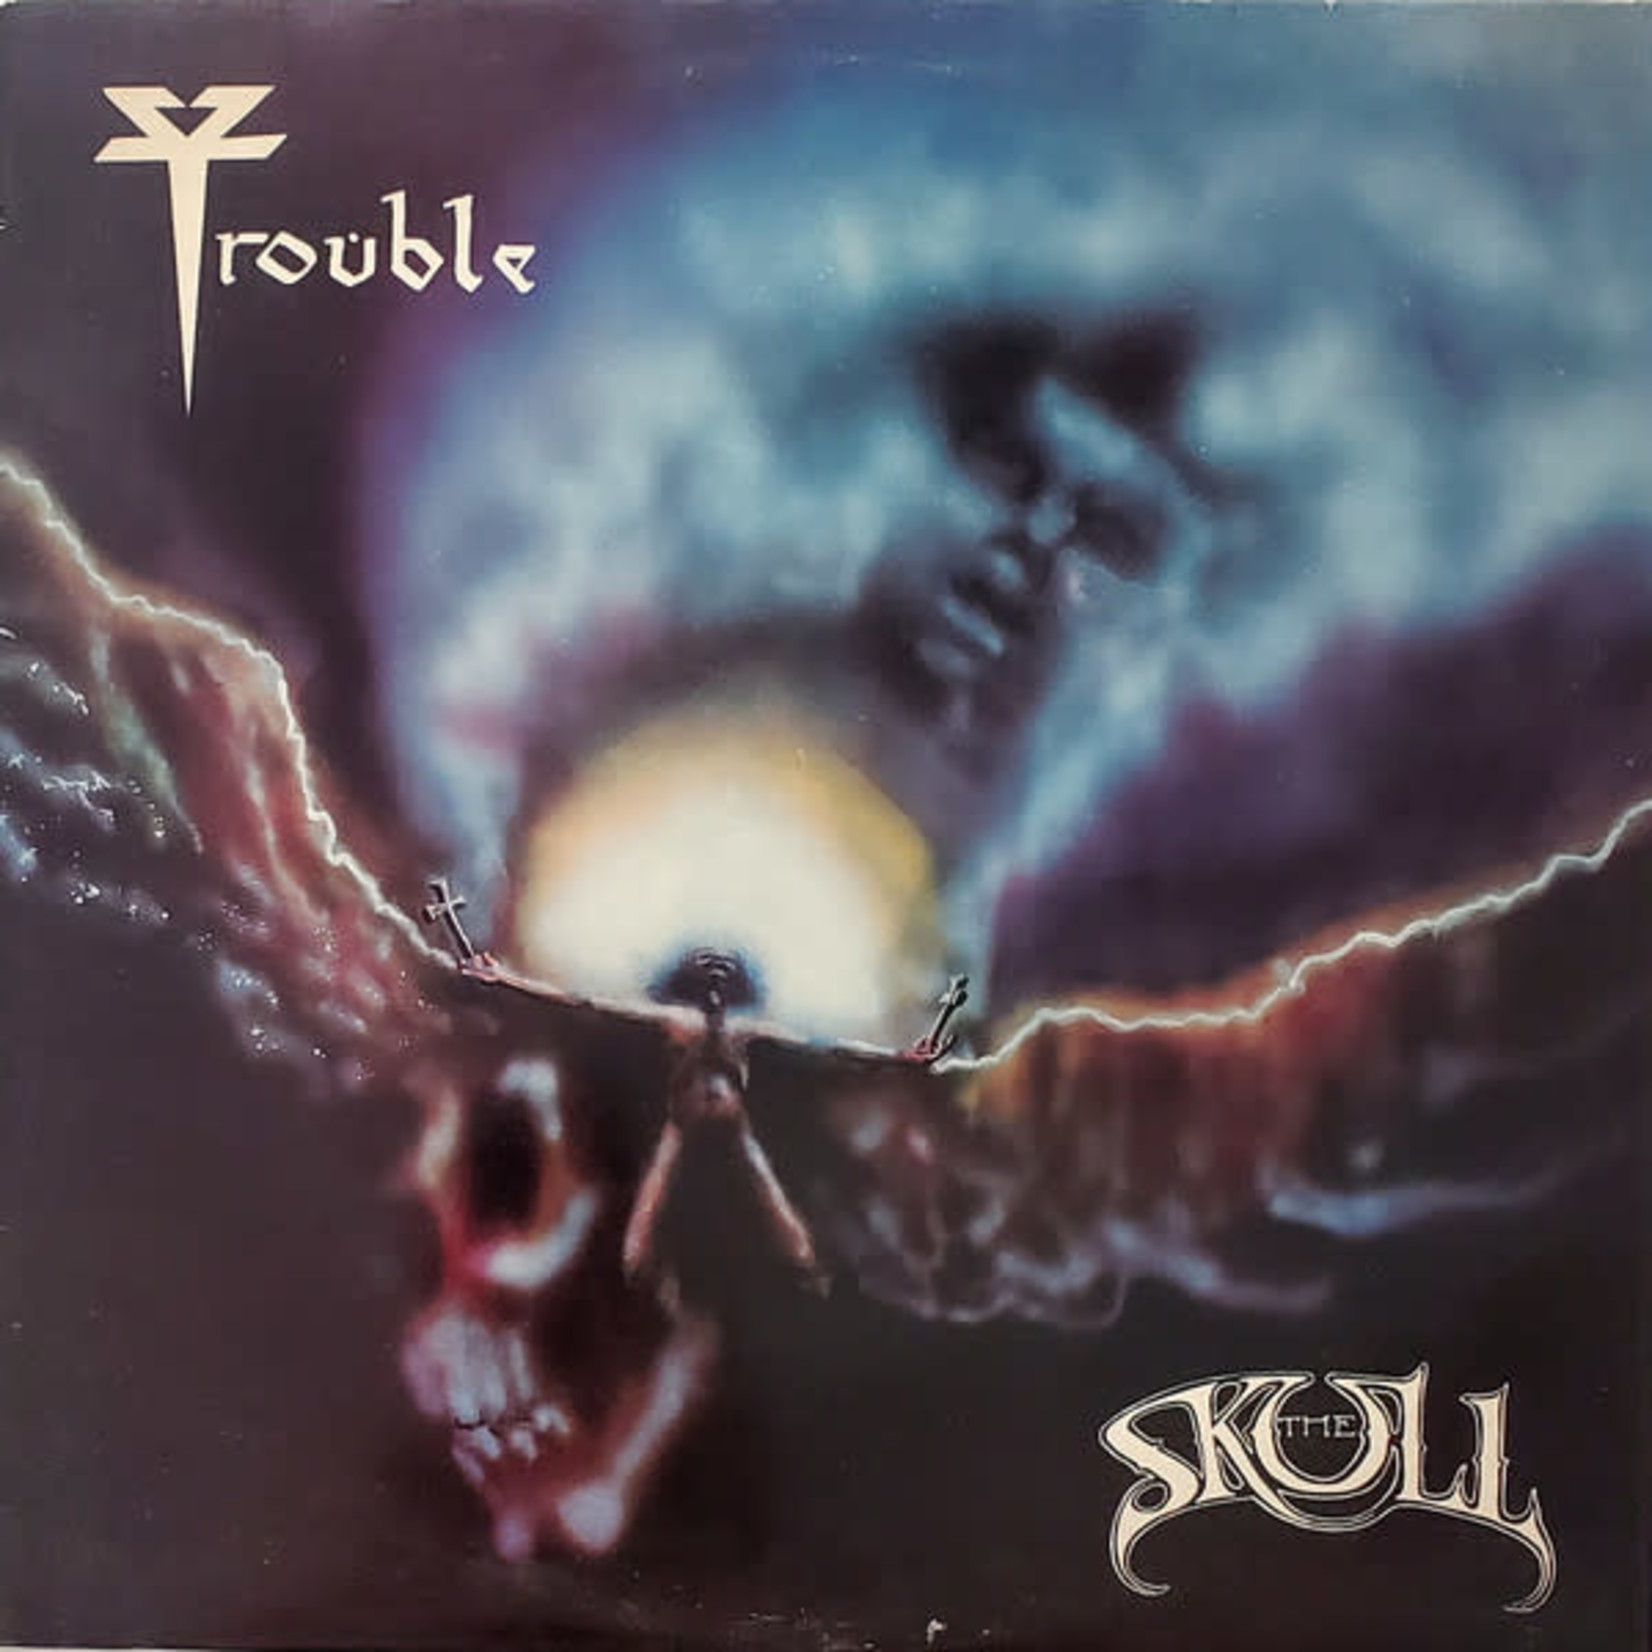 Trouble - The Skull (1985 remaster)